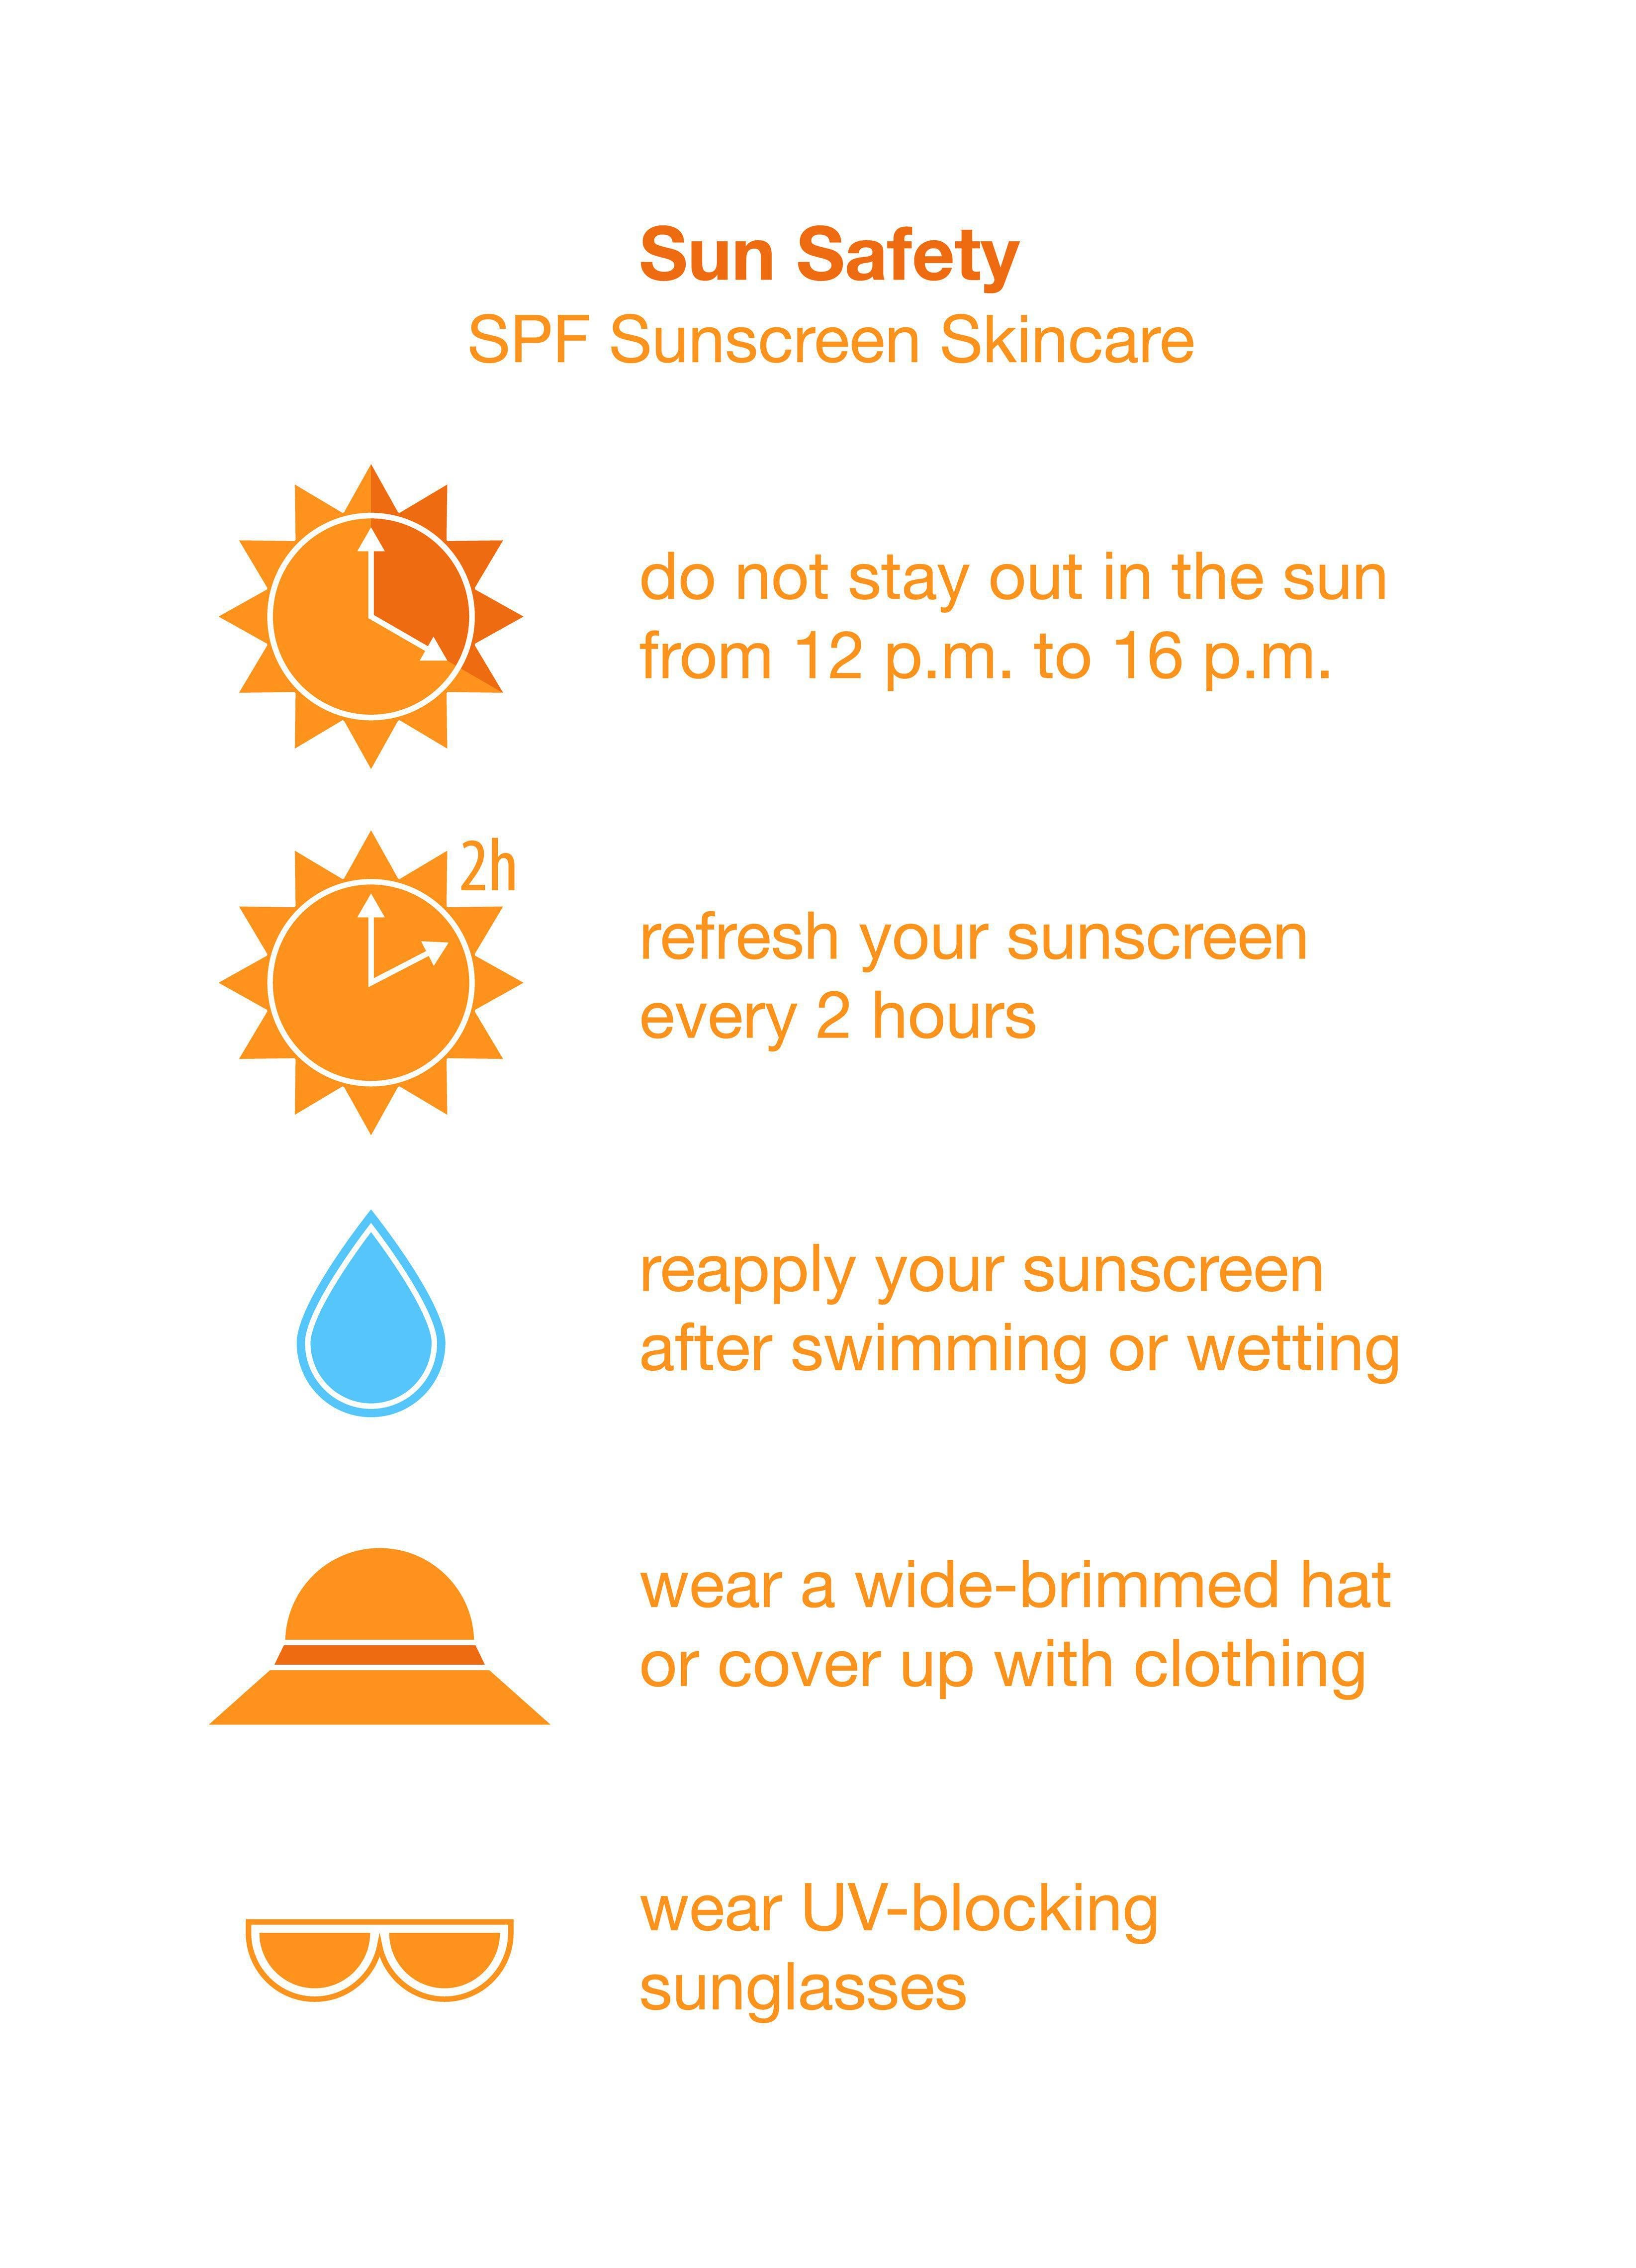 SUN_SAFETY_GUIDELINES